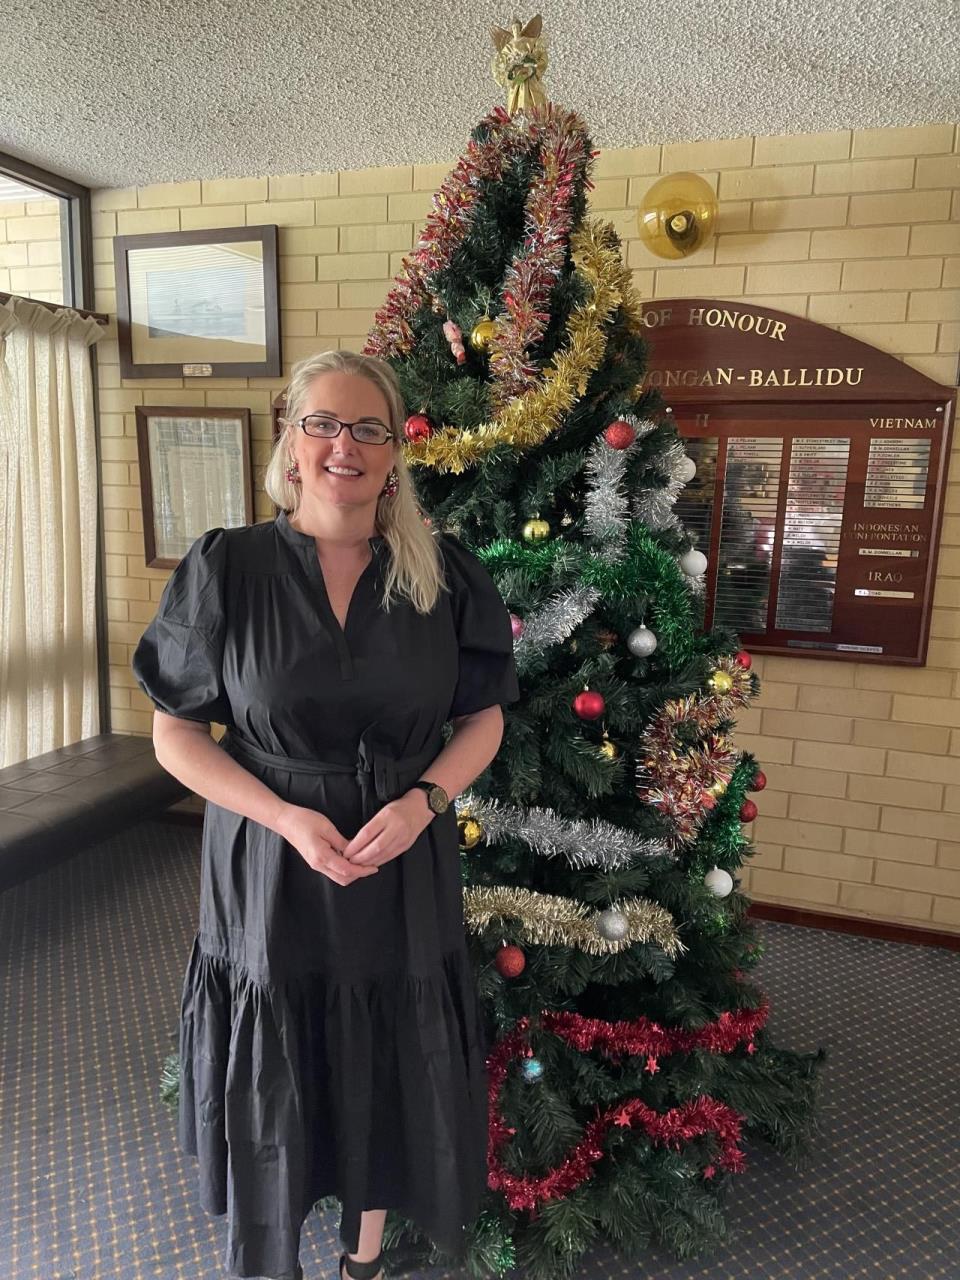 A Christmas Message from the Shire President...